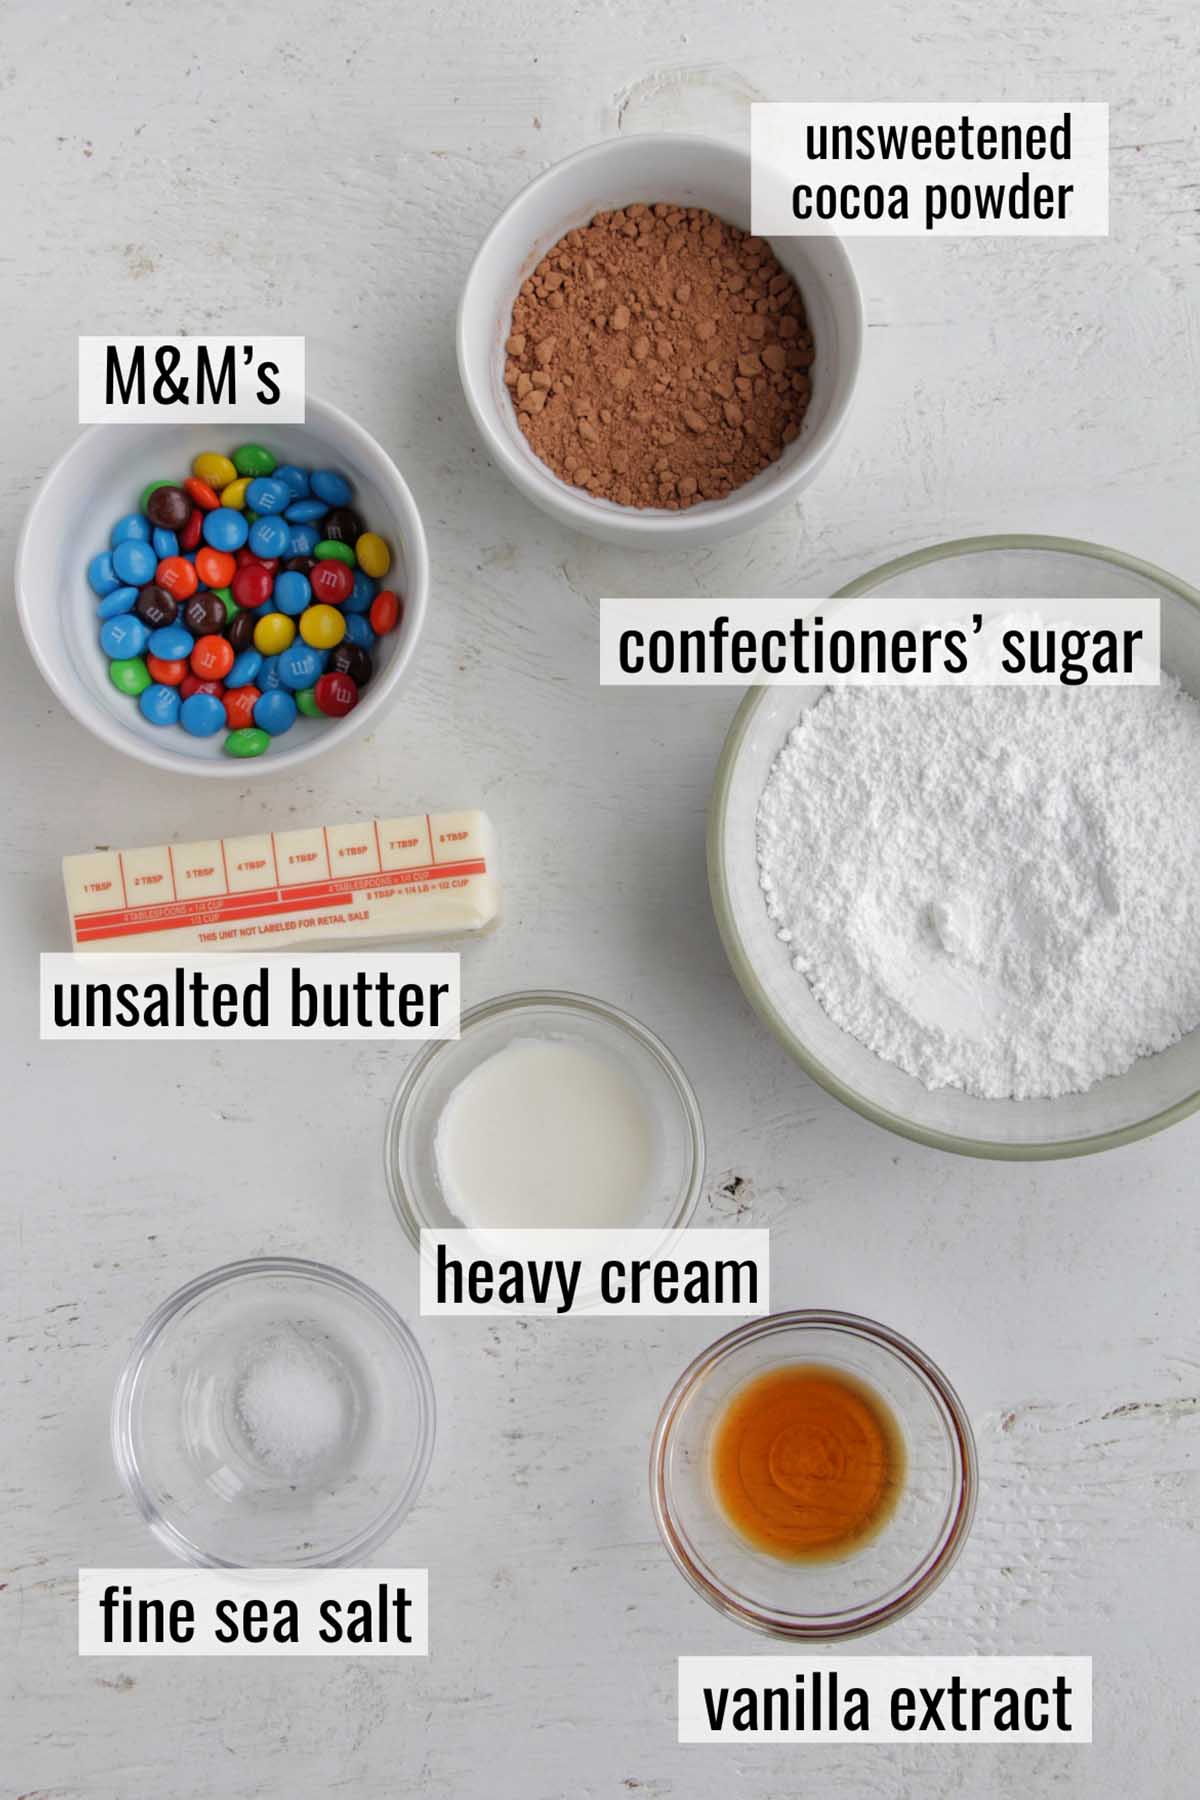 M&M macaron filling ingredients with labels.